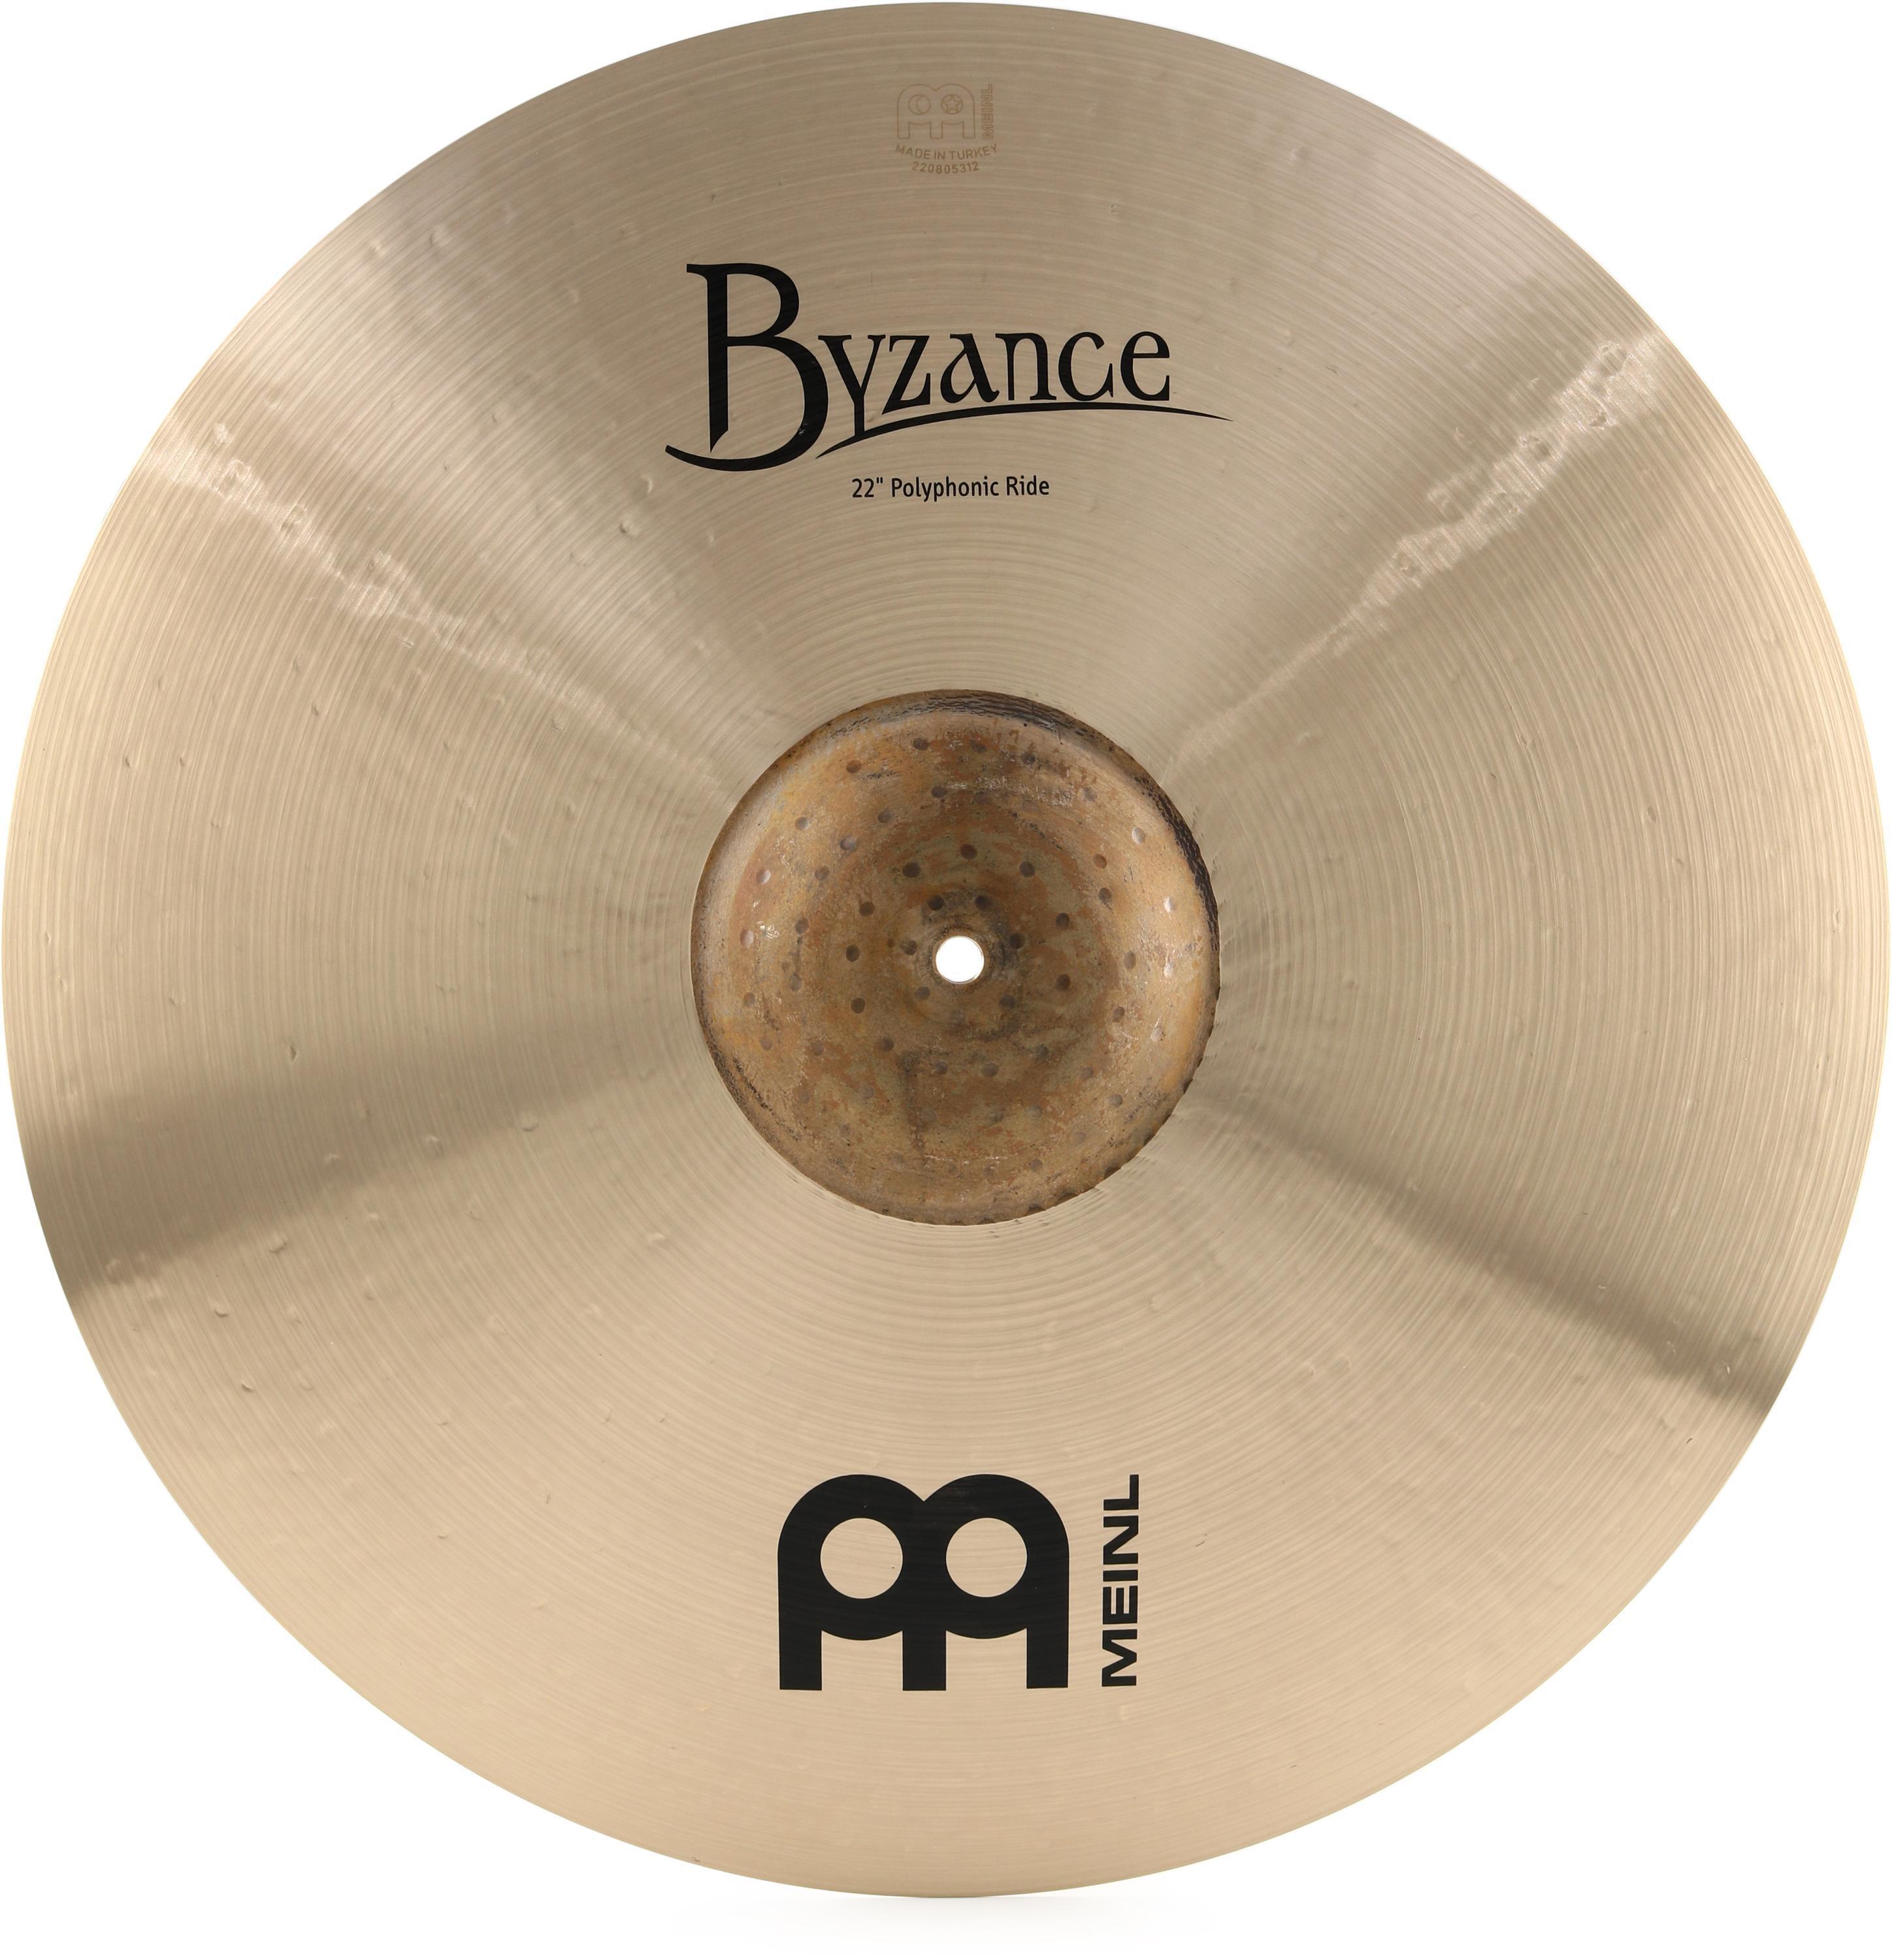 Meinl Cymbals Byzance Traditional Polyphonic Ride Cymbal - 22-inch